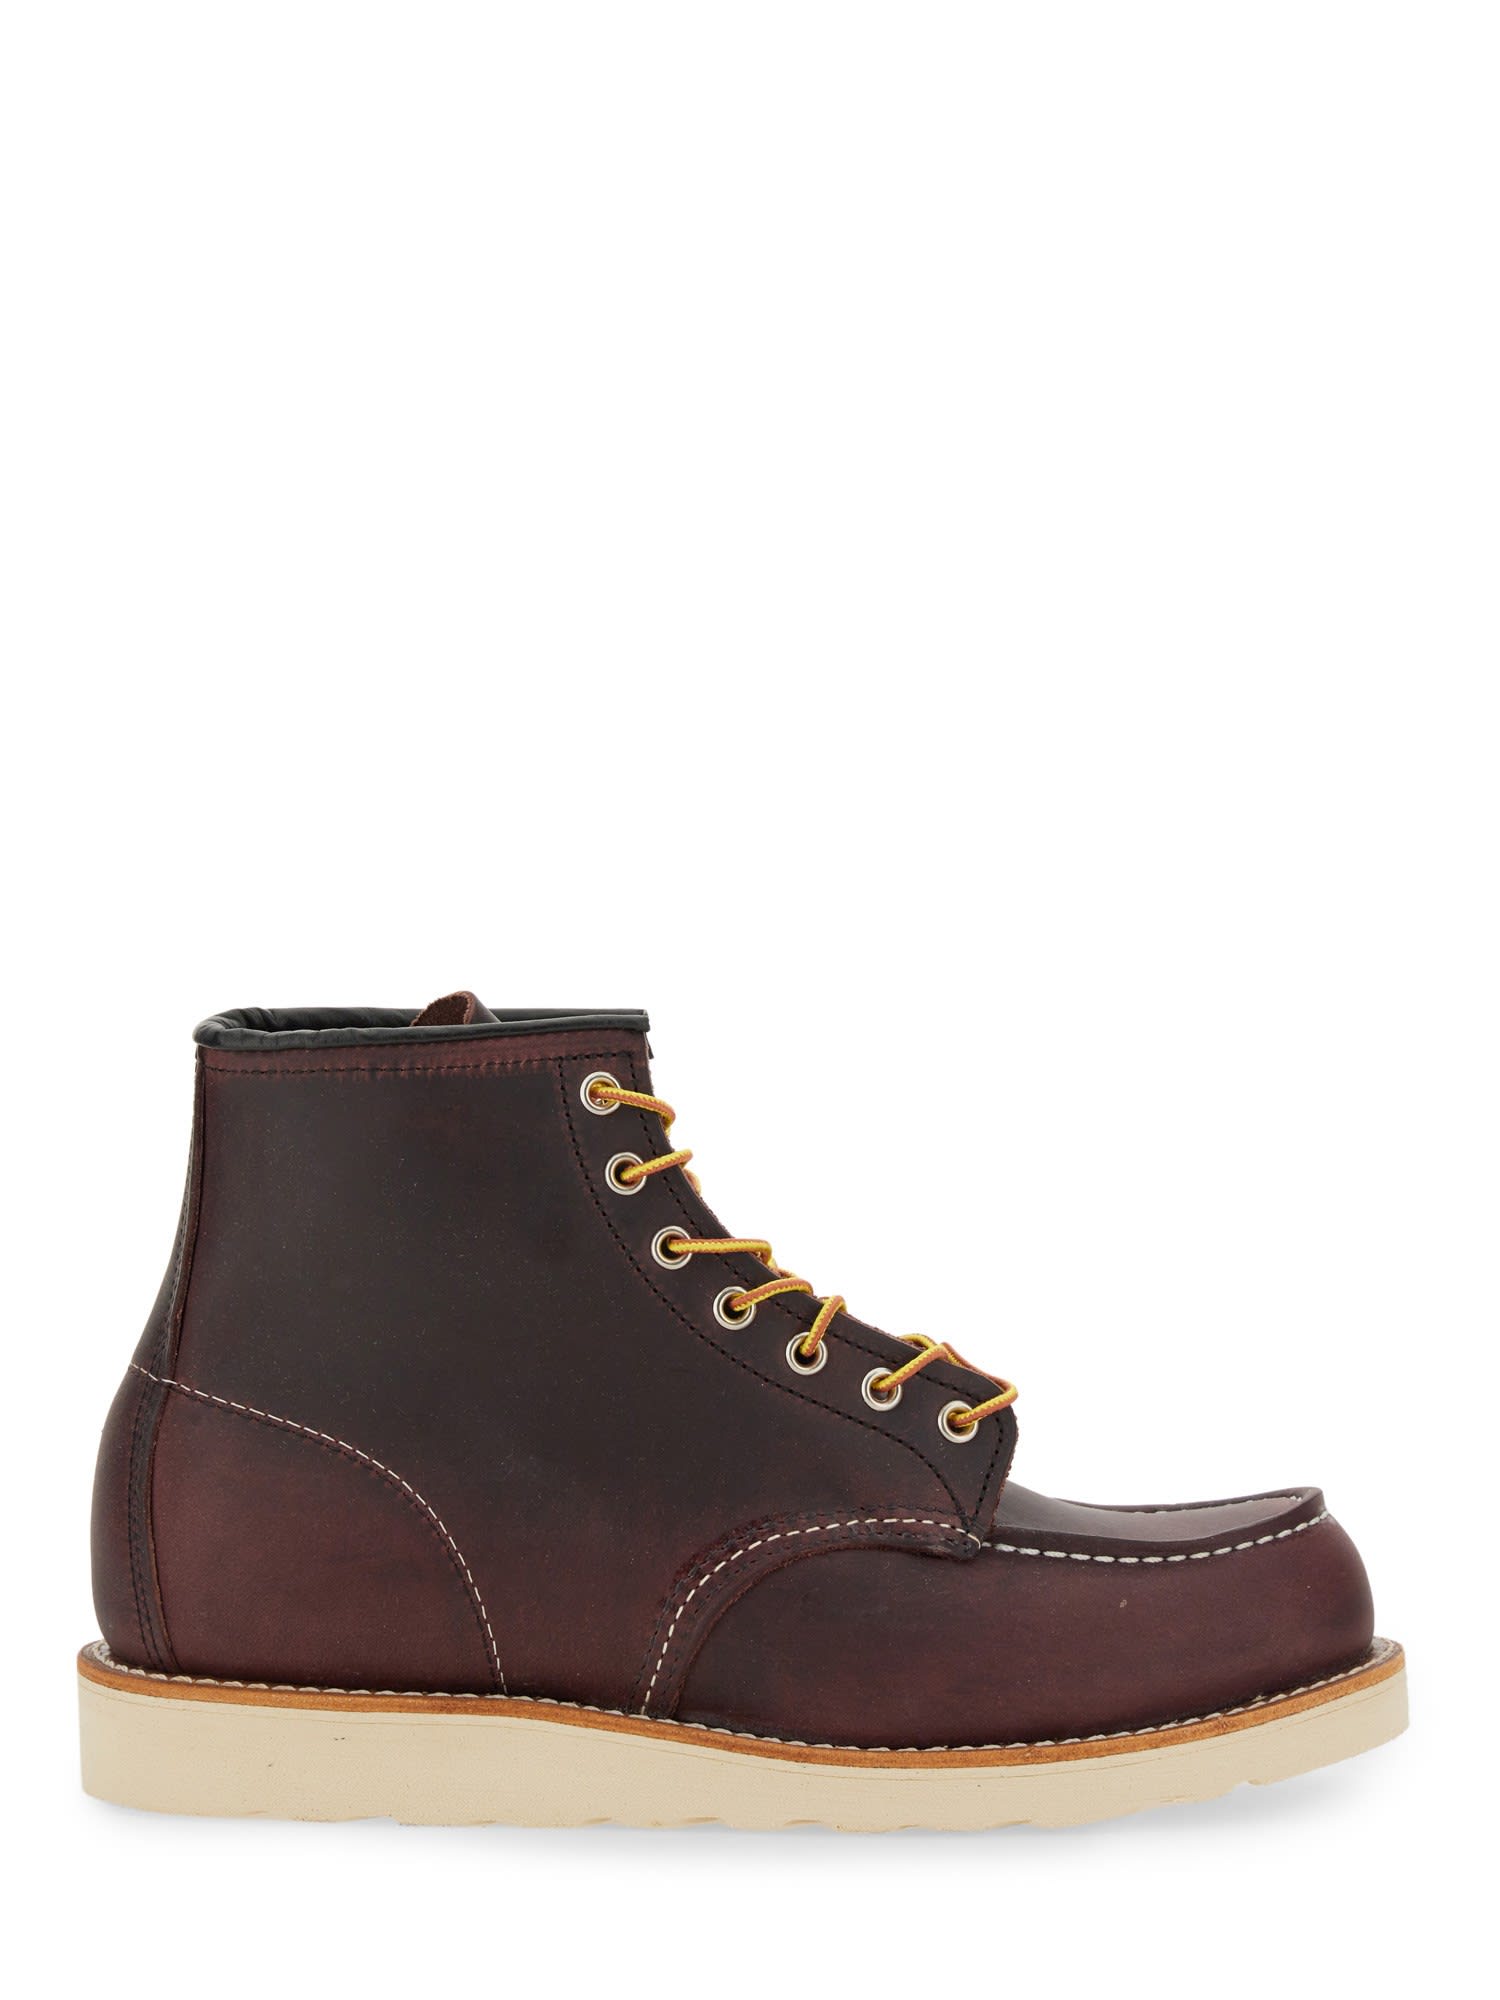 RED WING LEATHER BOOT